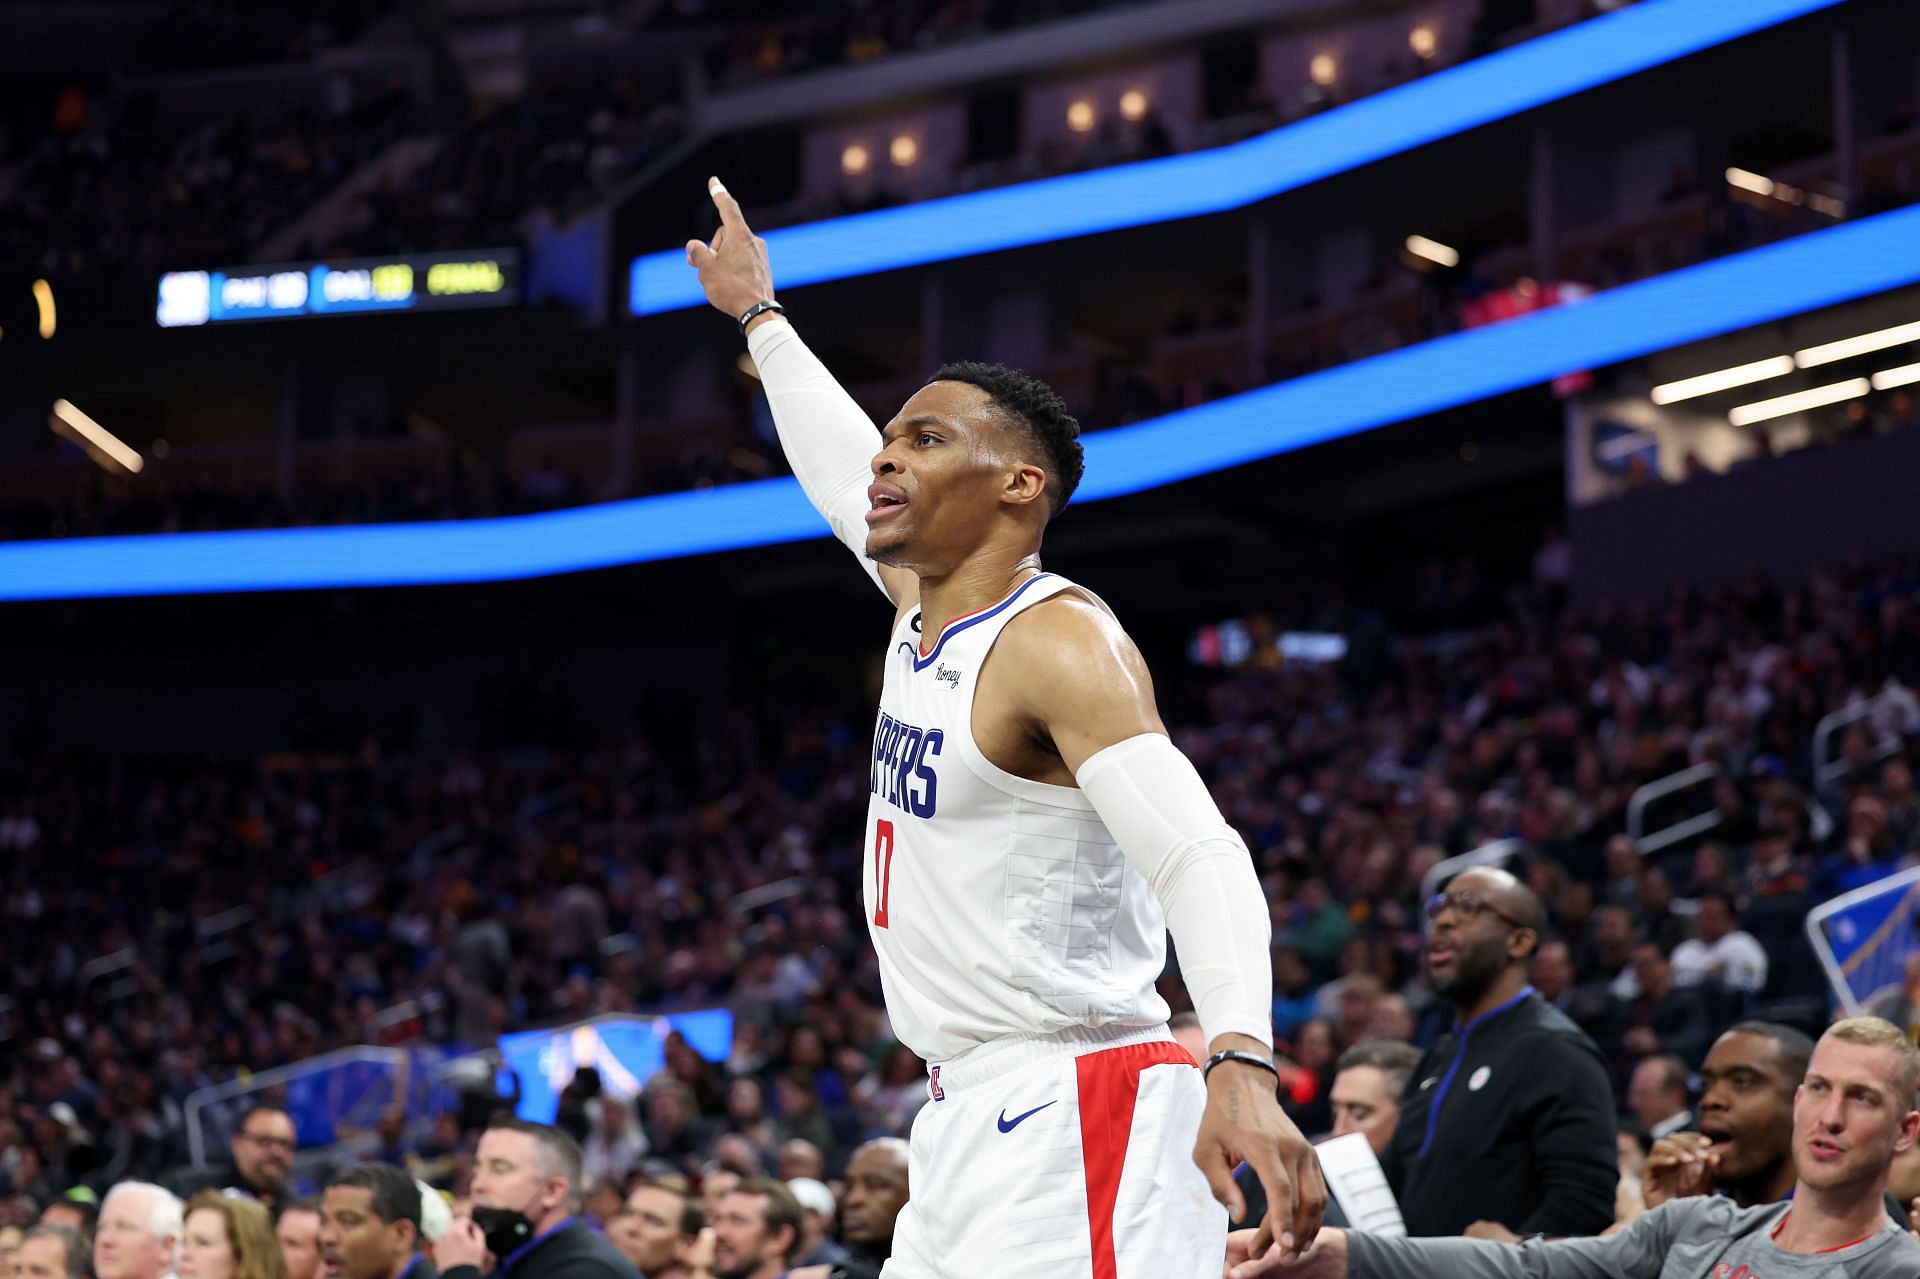 Russell Westbrook Eviscerates Clippers After Trolling LA with